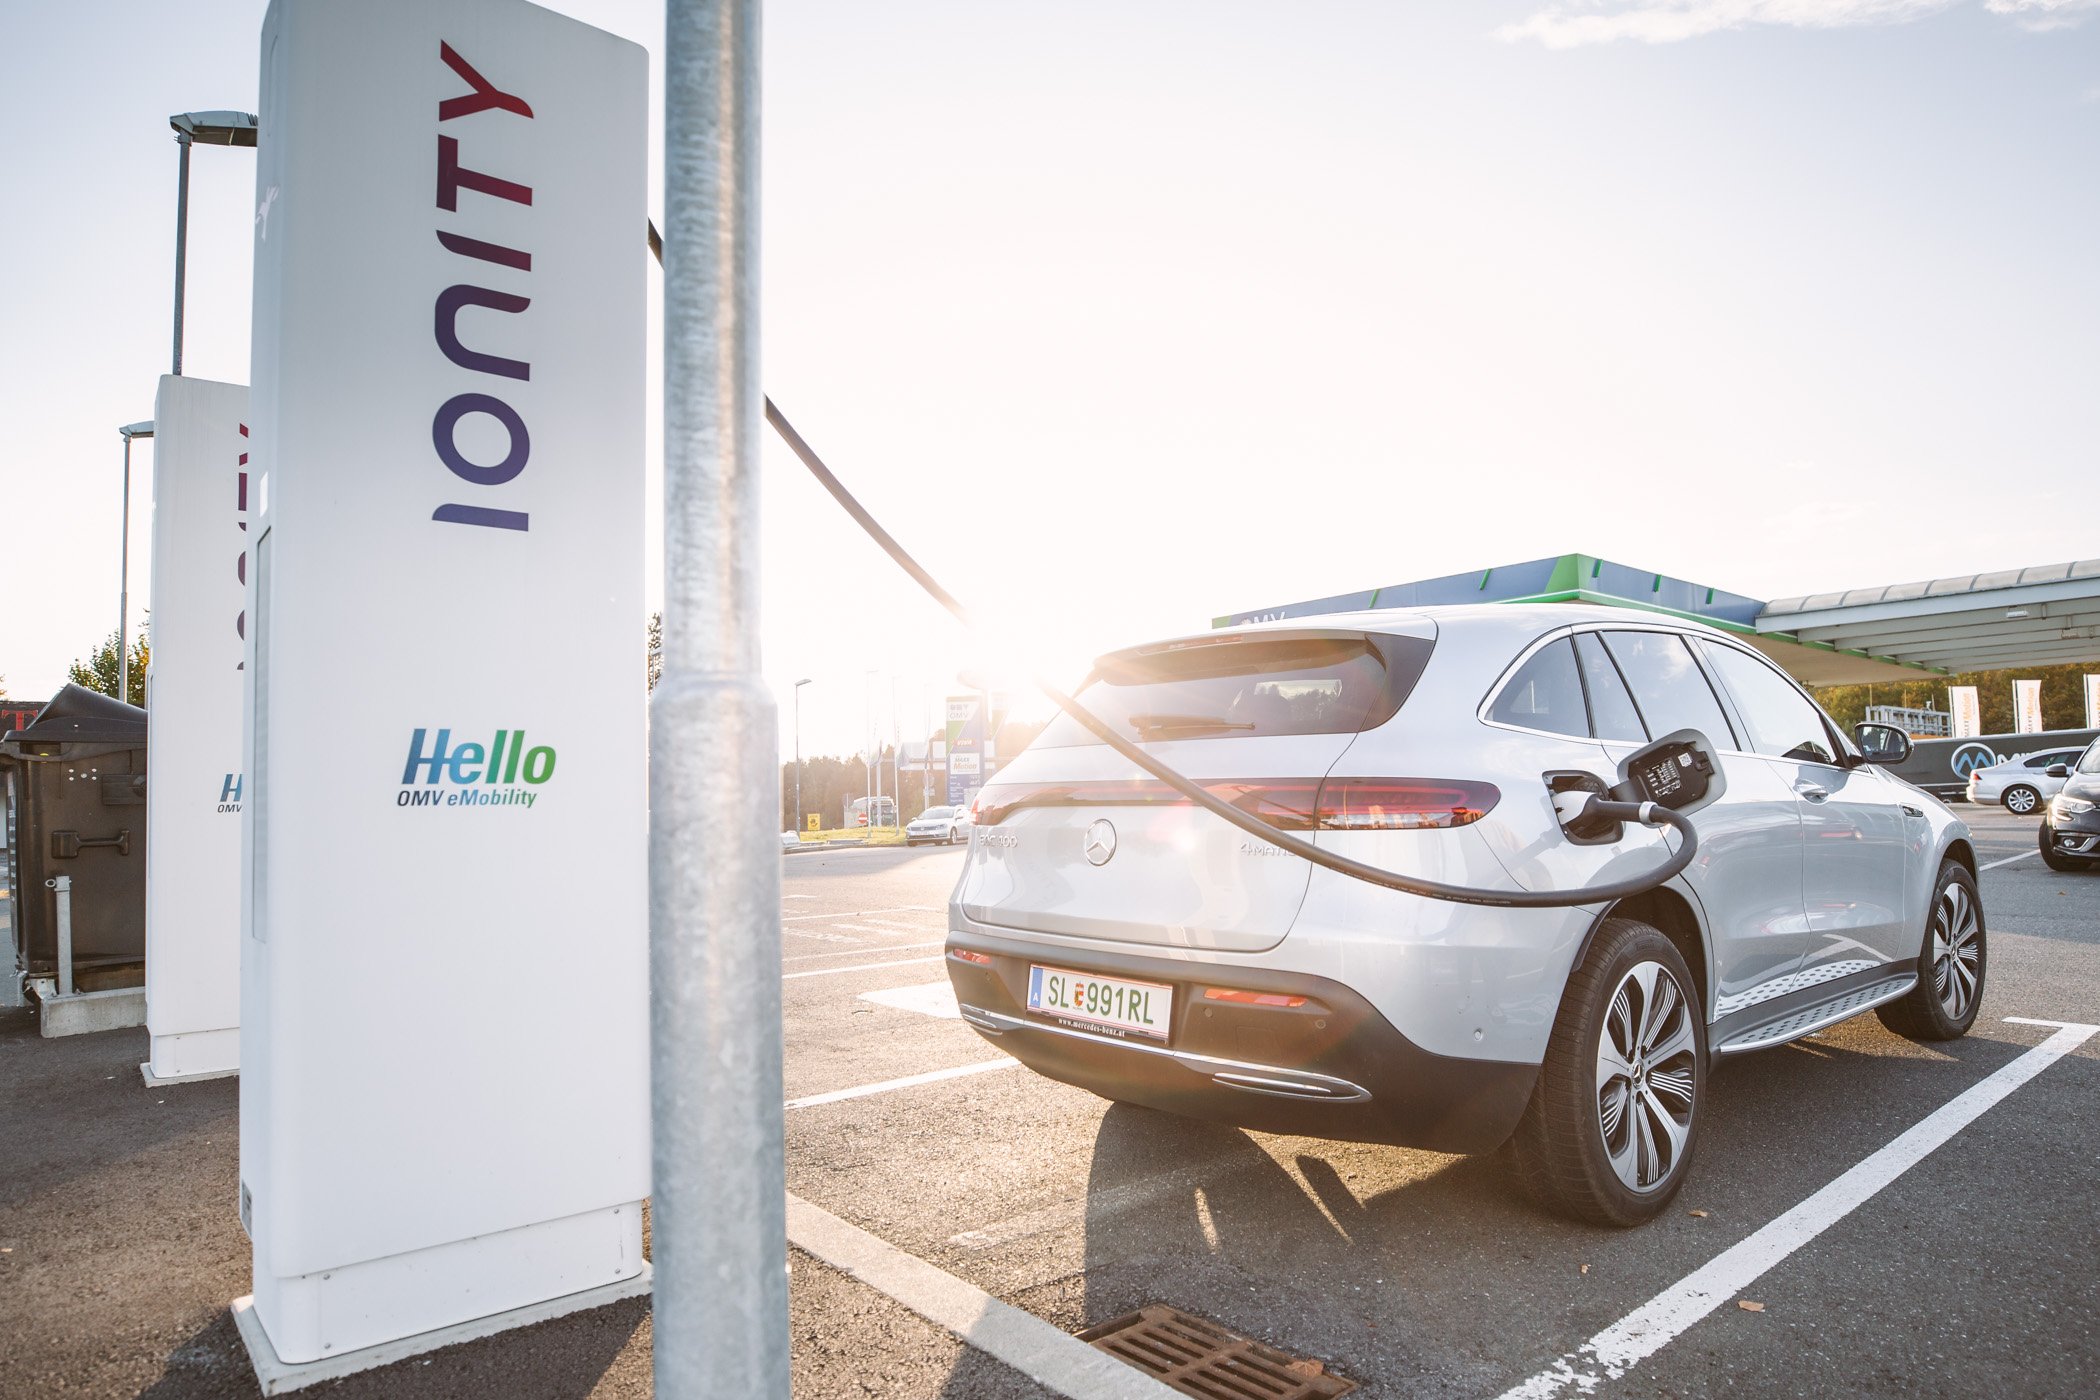 Charging the Mercedes EQC at an Ionity High power charging station